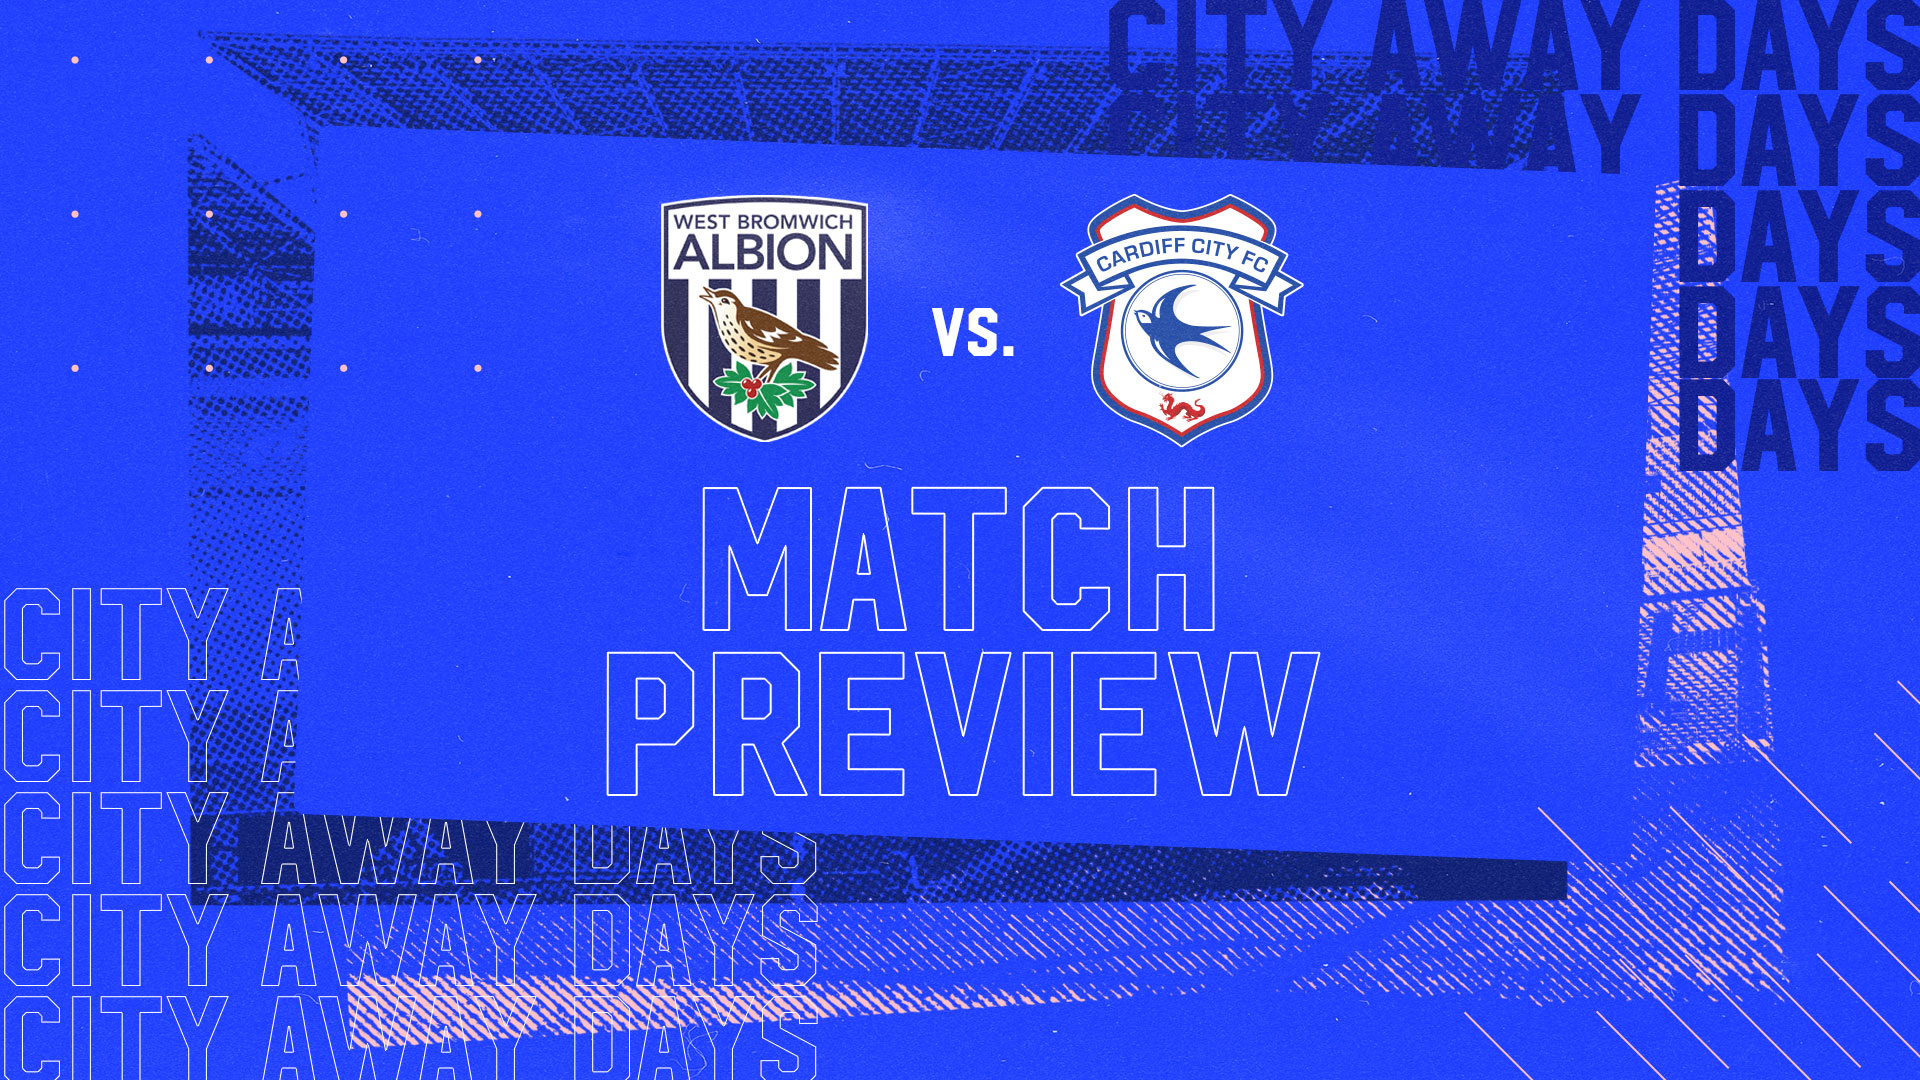 The Bluebirds travel to the Hawthorns on Jan 2nd...